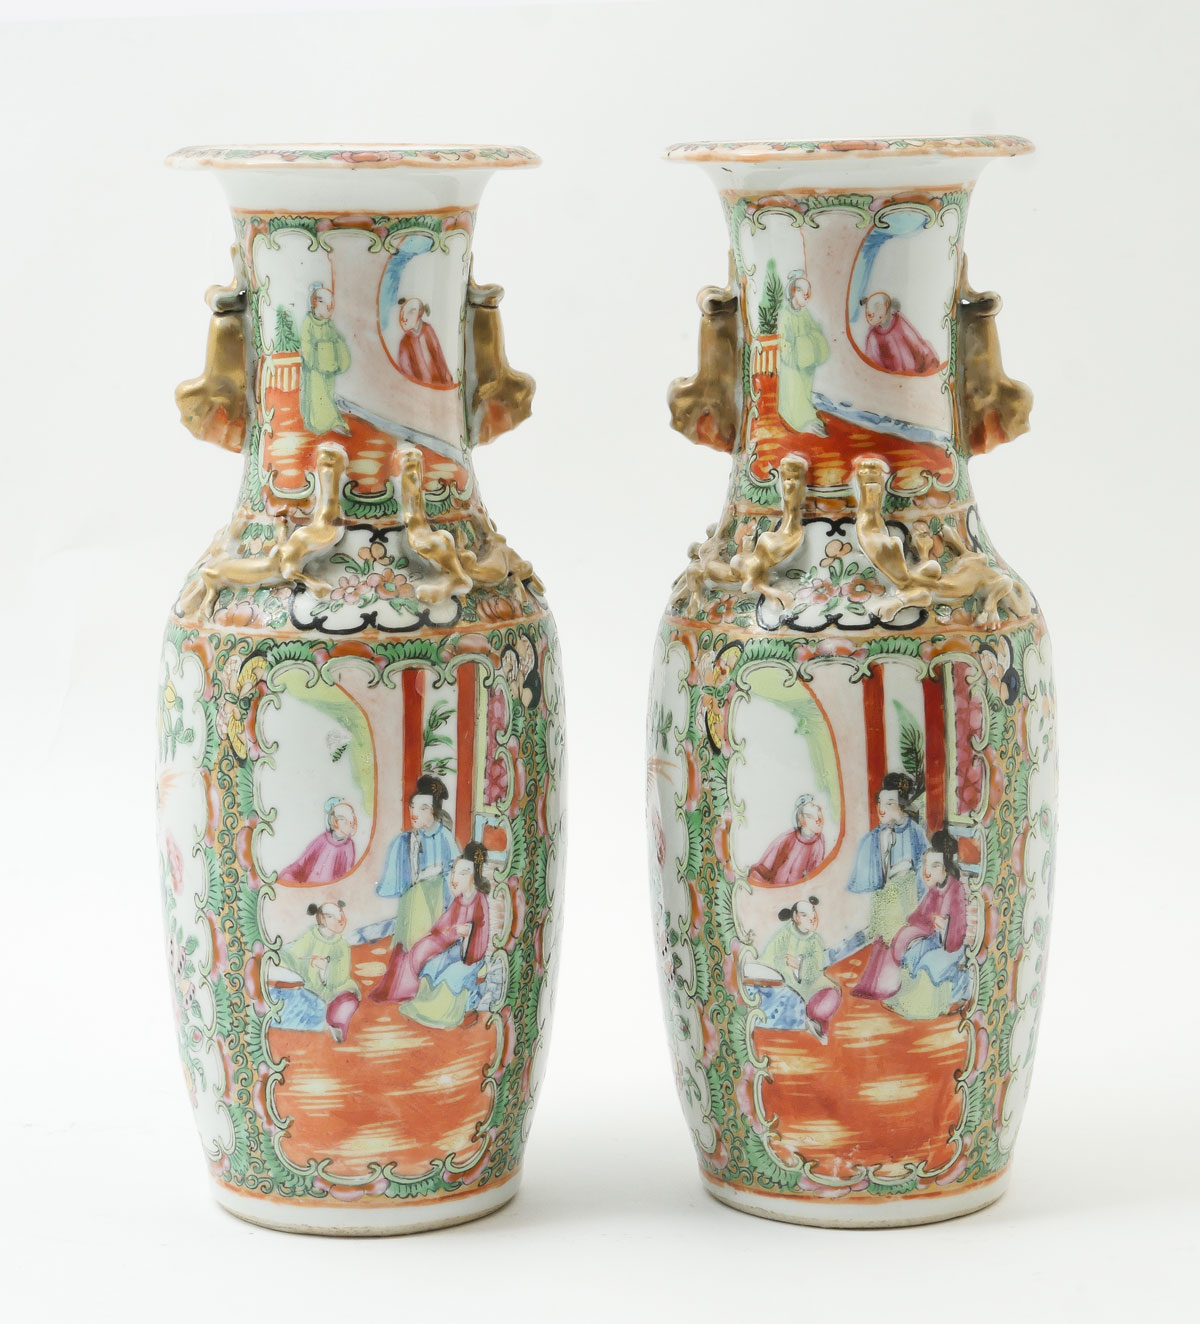 PAIR OF LATE 19TH C CHINESE ROSE 36be90